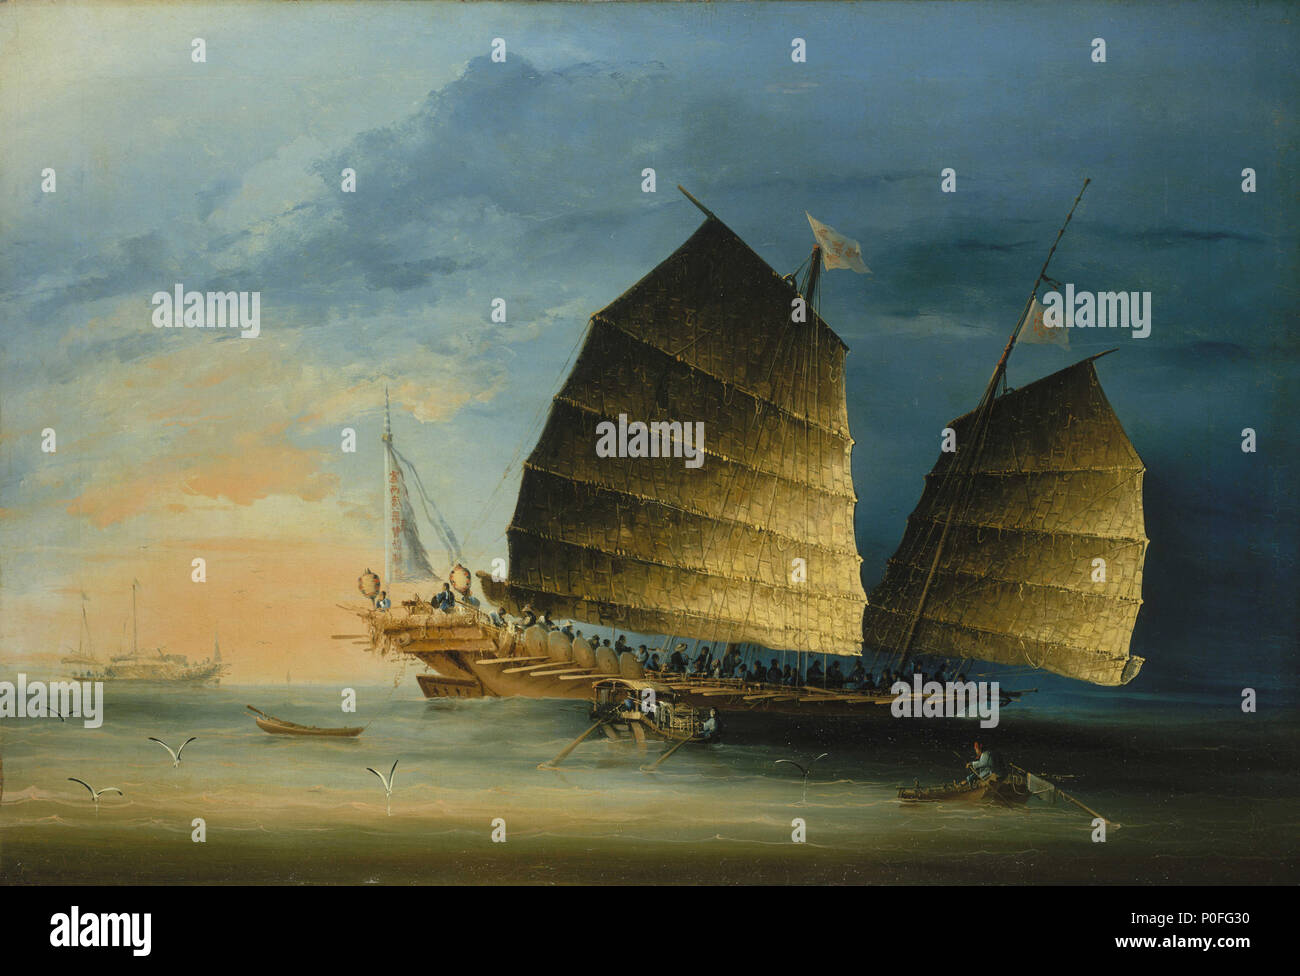 .  English: A war junk A 19th century portrait of a Chinese war junk dated about 1850. Throughout China's history, junks have been used as war ships. They usually have two or three sails and each mast is made of bamboo because of its strength. This junk is shown in full sail with a large number of figures on board. The warrior’s shields can be seen fixed to the side of the junk in between all the oars. Two lanterns are positioned at the stern with a small cannon in between and there are several guards visible. Small local craft can be seen near the ship, the one to the right is obviously a fis Stock Photo